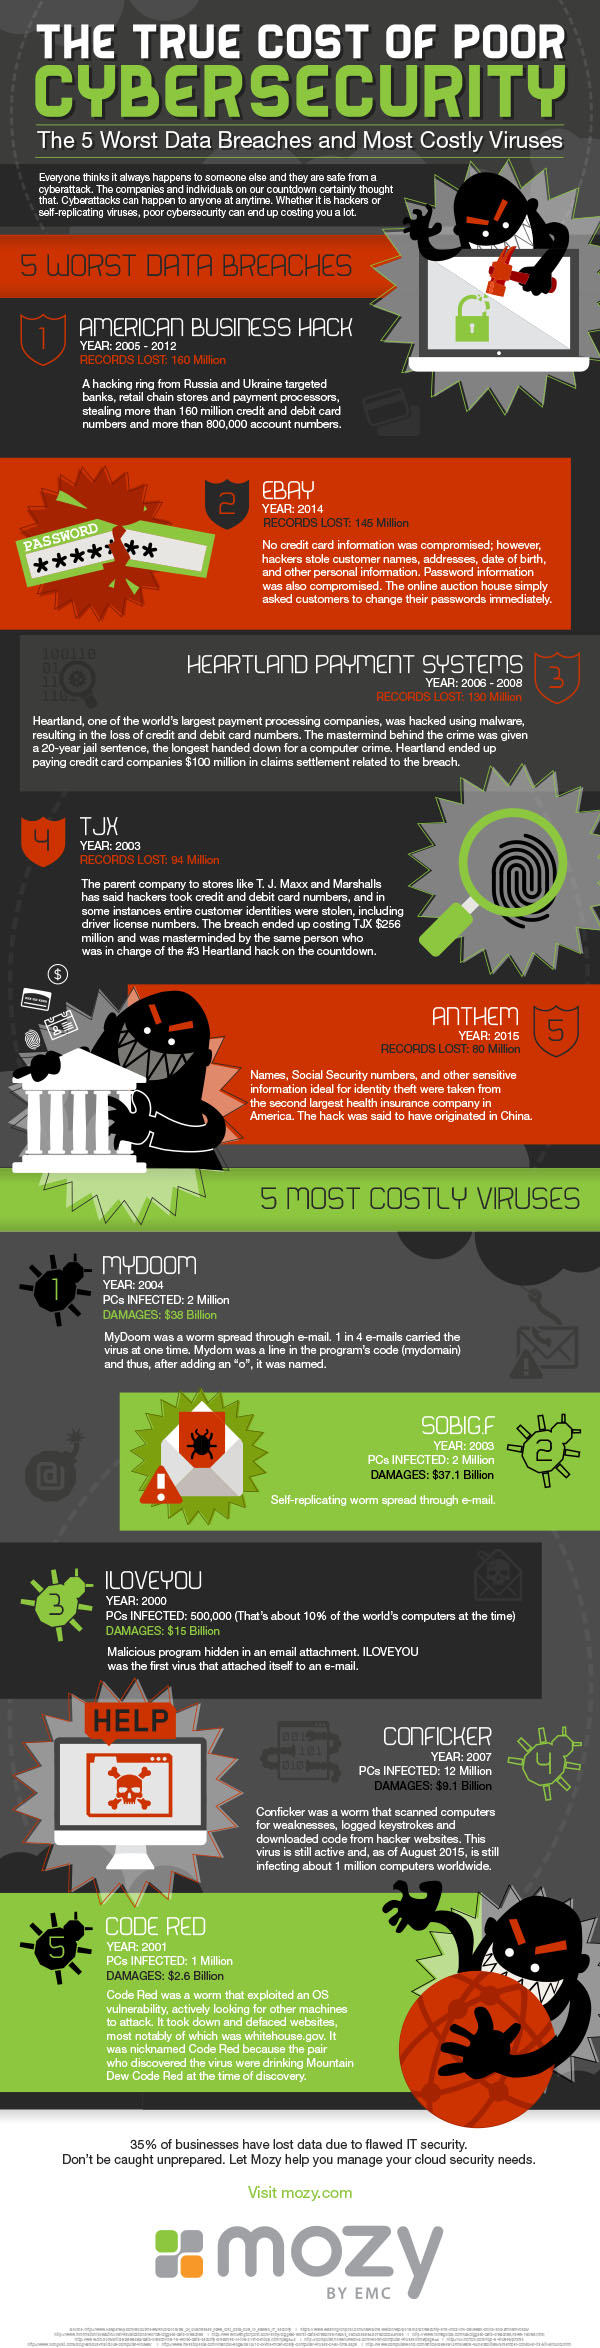 The True Cost of Cybersecurity - Mozy Infographic